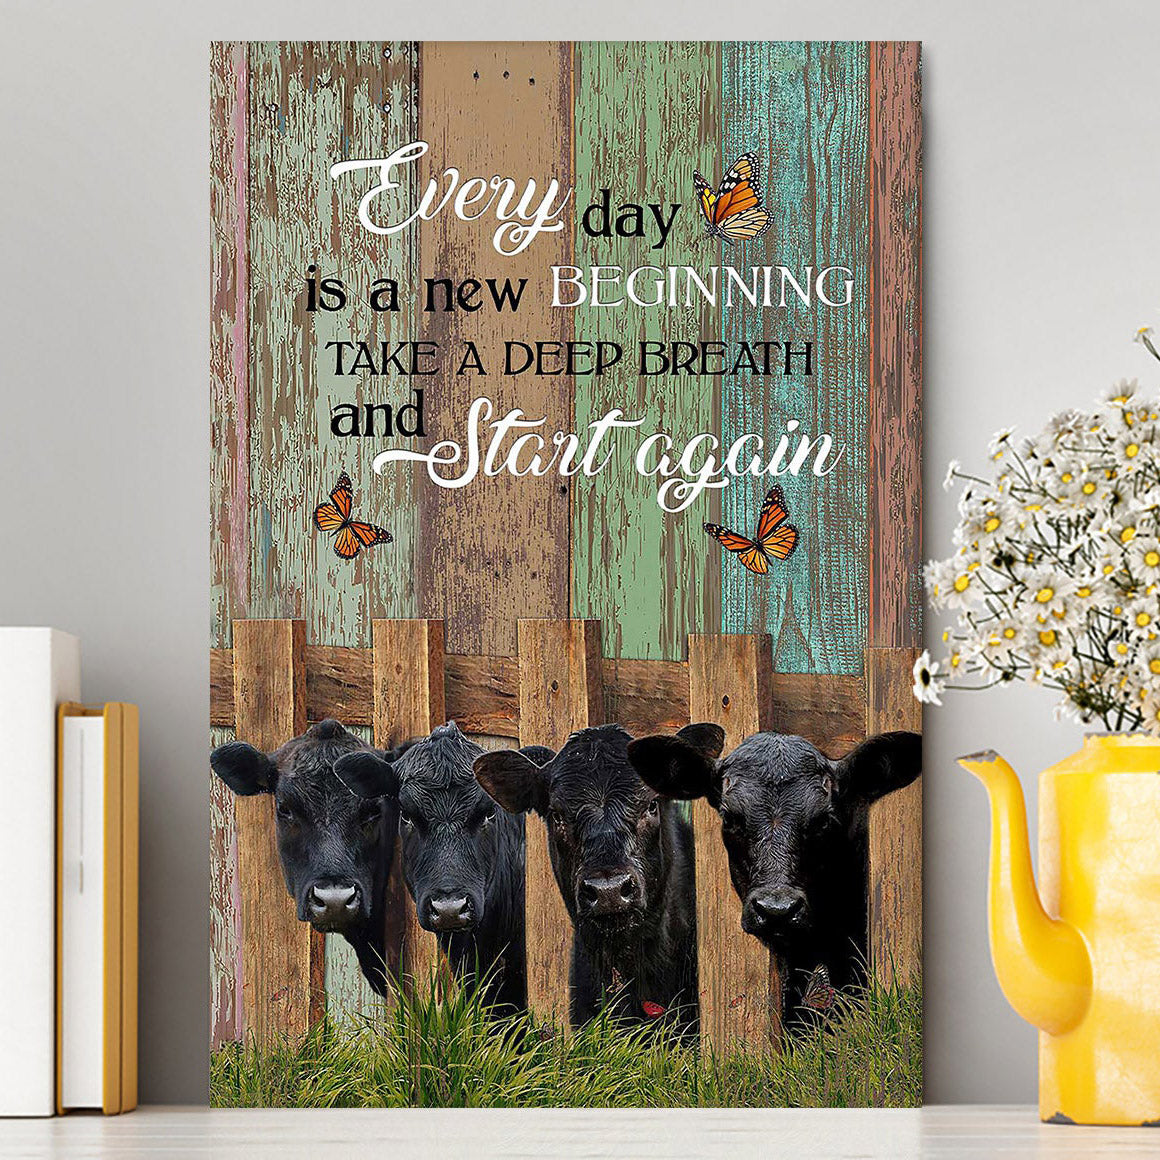 Angus Cow Everyday Is A New Beginning Canvas Art - Christian Art - Bible Verse Wall Art - Religious Home Decor